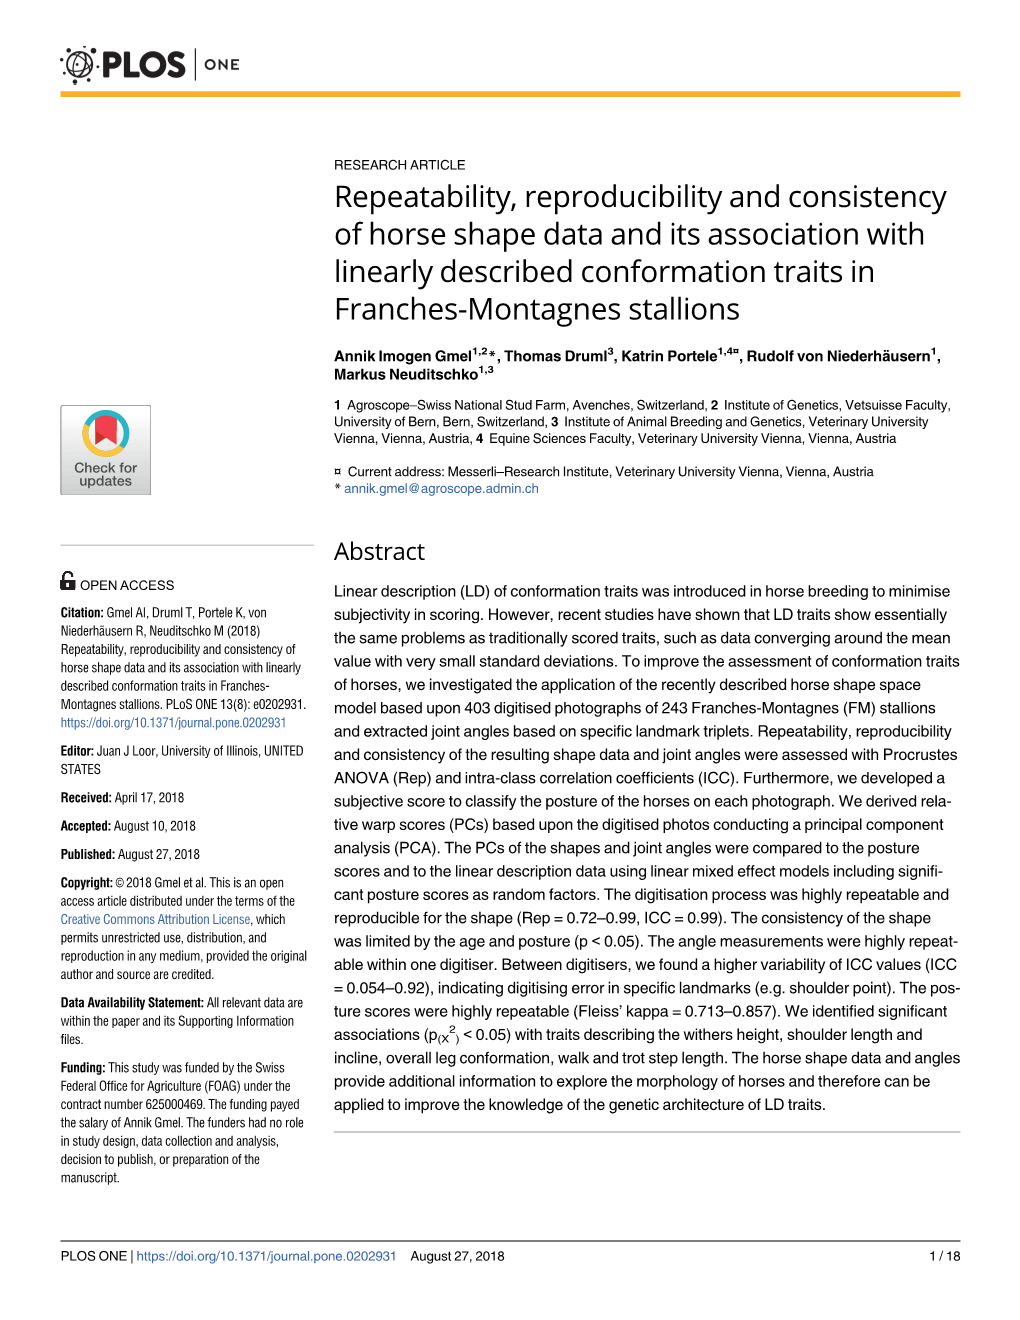 Repeatability, Reproducibility and Consistency of Horse Shape Data and Its Association with Linearly Described Conformation Traits in Franches-Montagnes Stallions